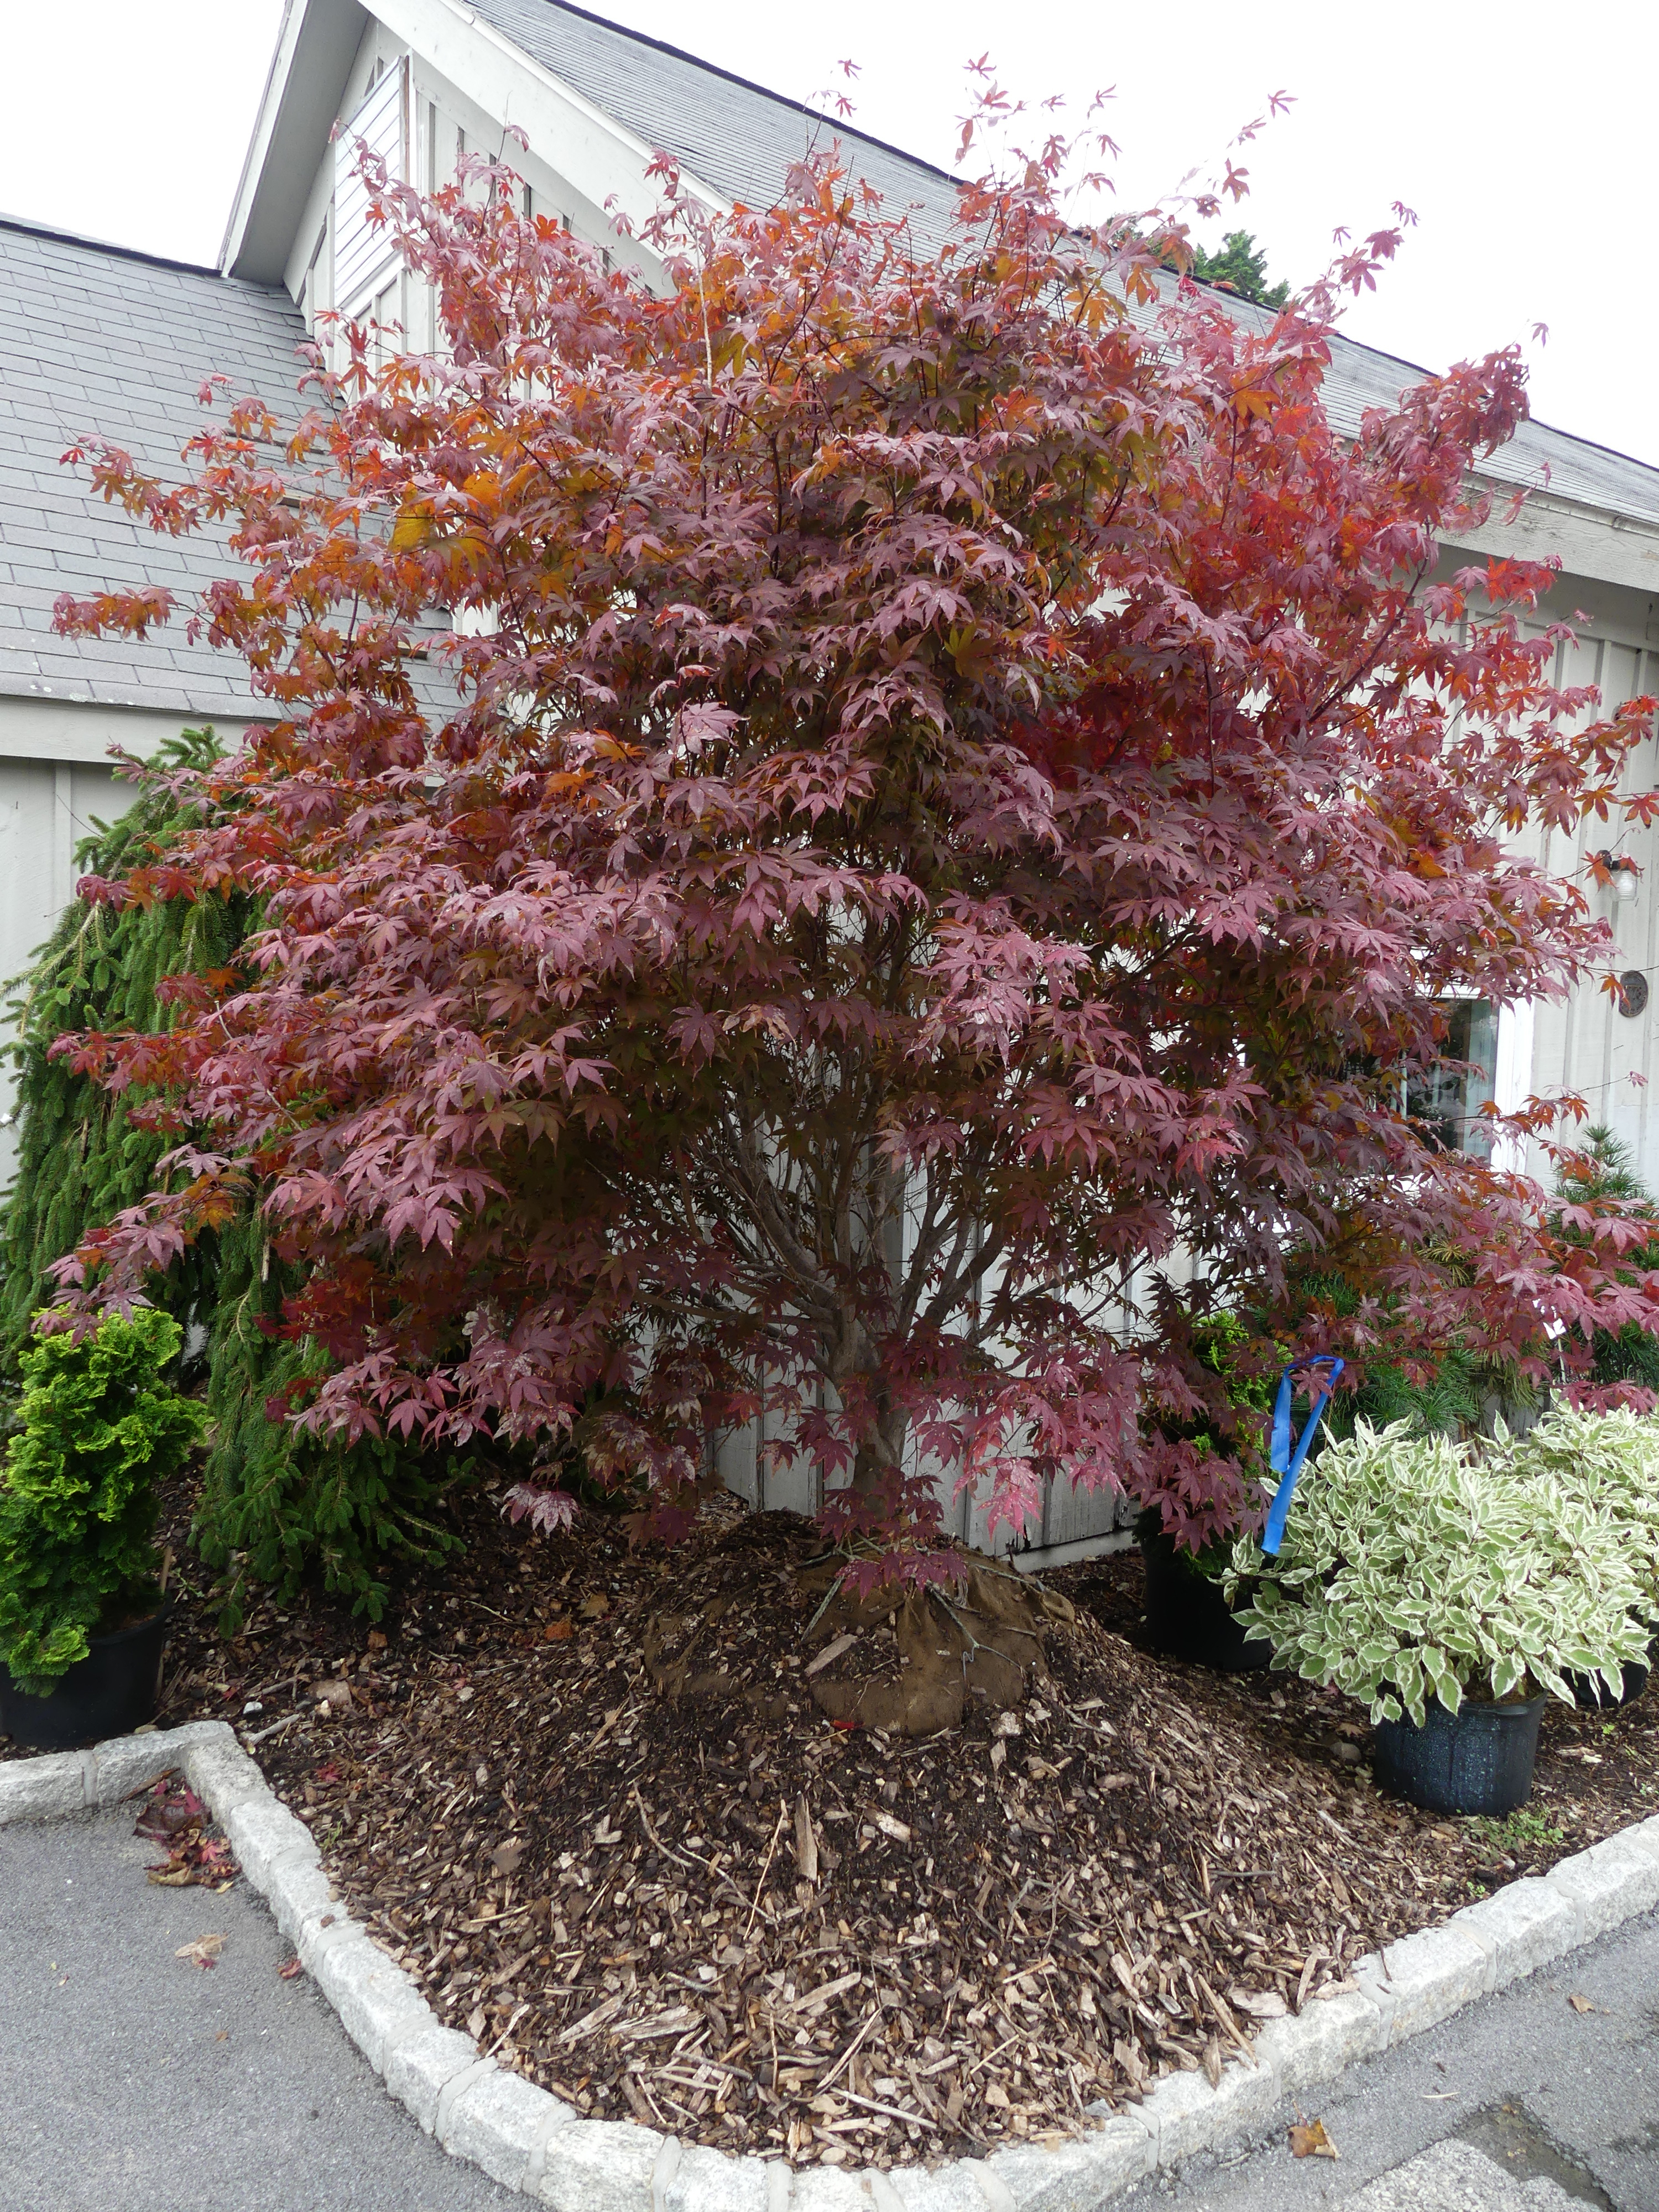 This Japanese maple was in front of a garden center waiting for a new owner. It’s half its original price and looks like a nice specimen offering exquisite fall color as it will morph from red or orange and yellow as it gets colder. ANDREW MESSINGER